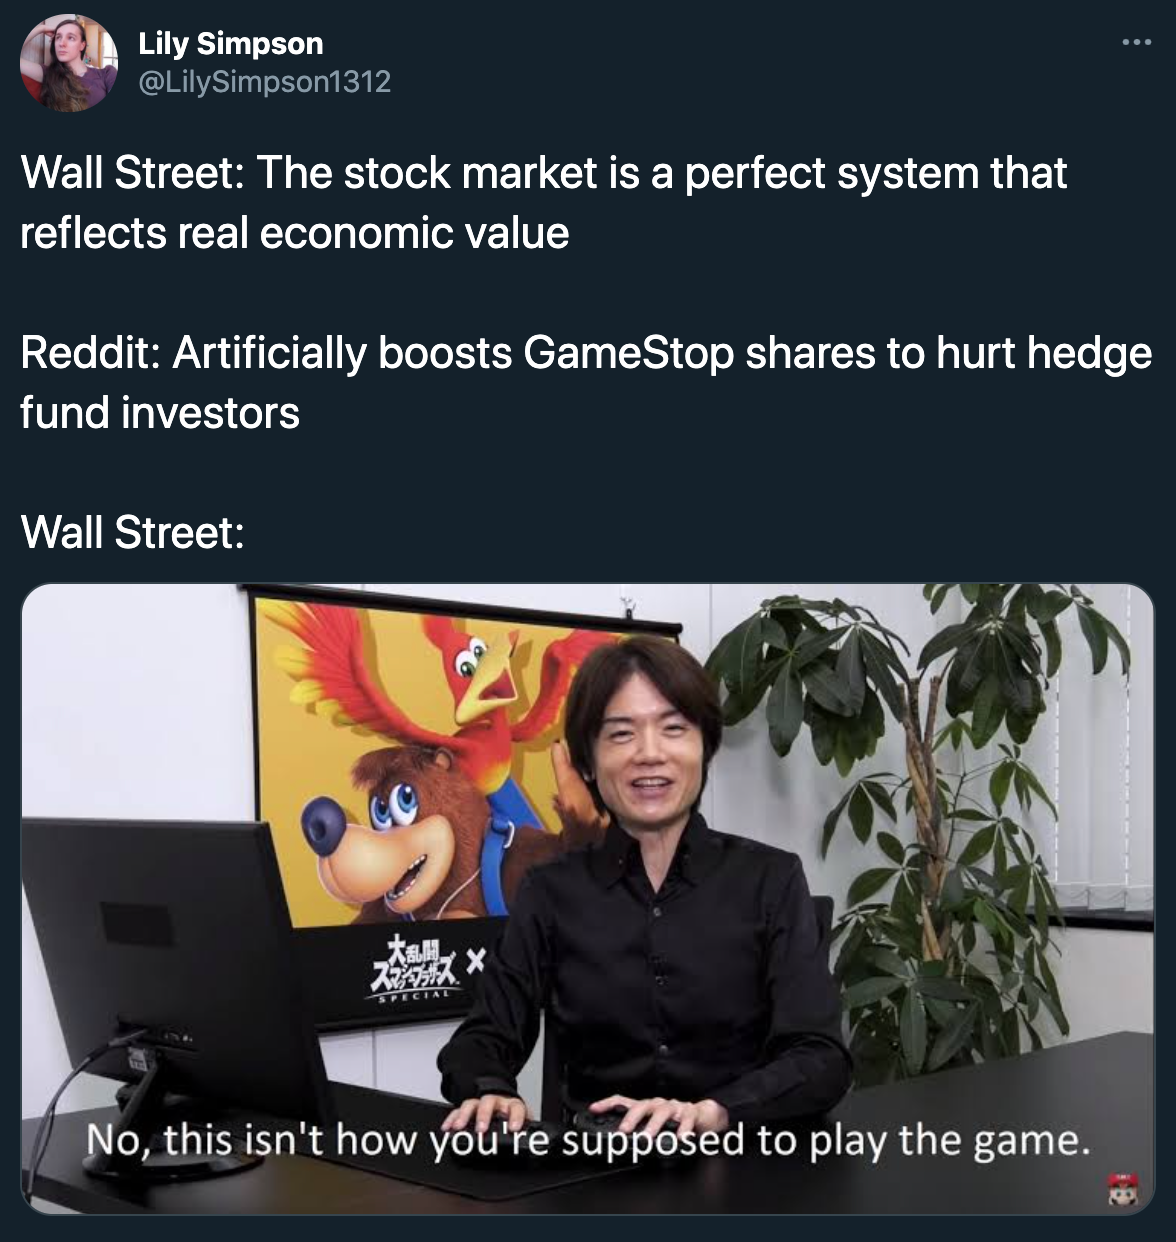 funny gamestop stock jokes - Wall Street The stock market is a perfect system that reflects real economic value Reddit Artificially boosts GameStop to hurt hedge fund investors Wall Street No, this isn't how you're supposed to play the game